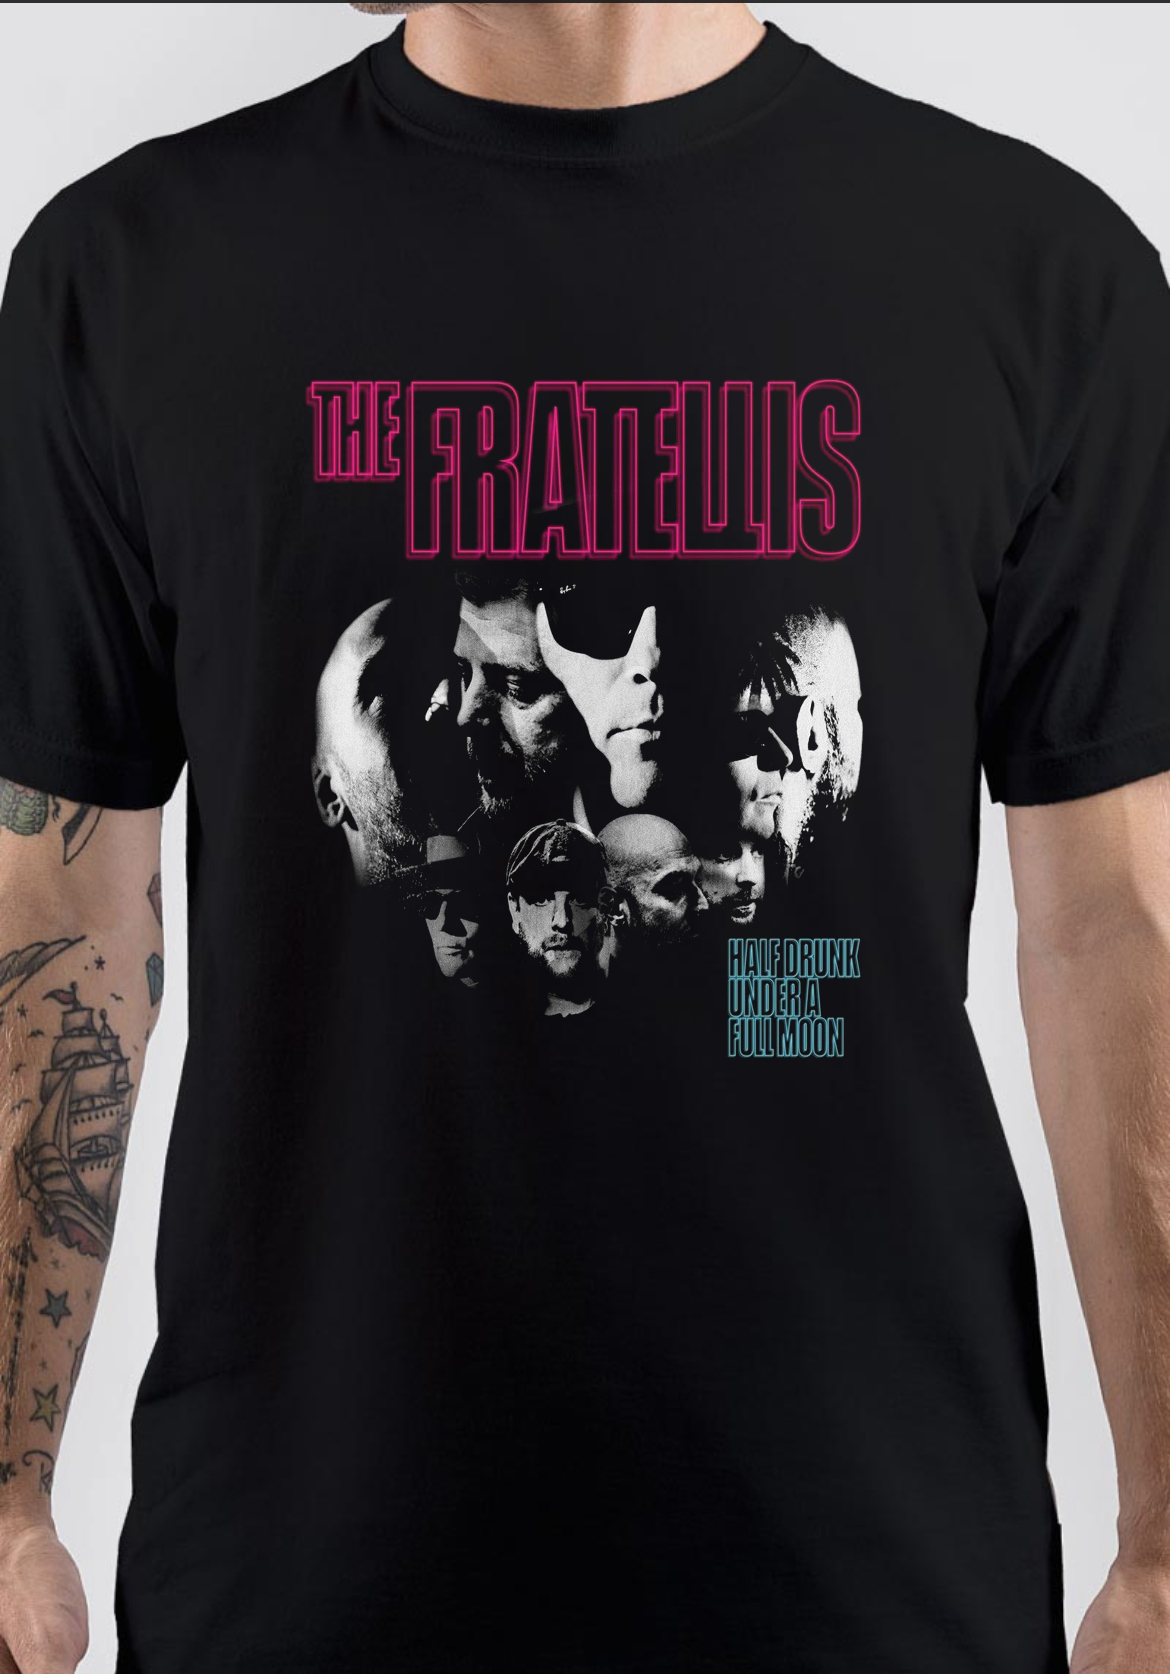 The Fratellis T-Shirt And Merchandise